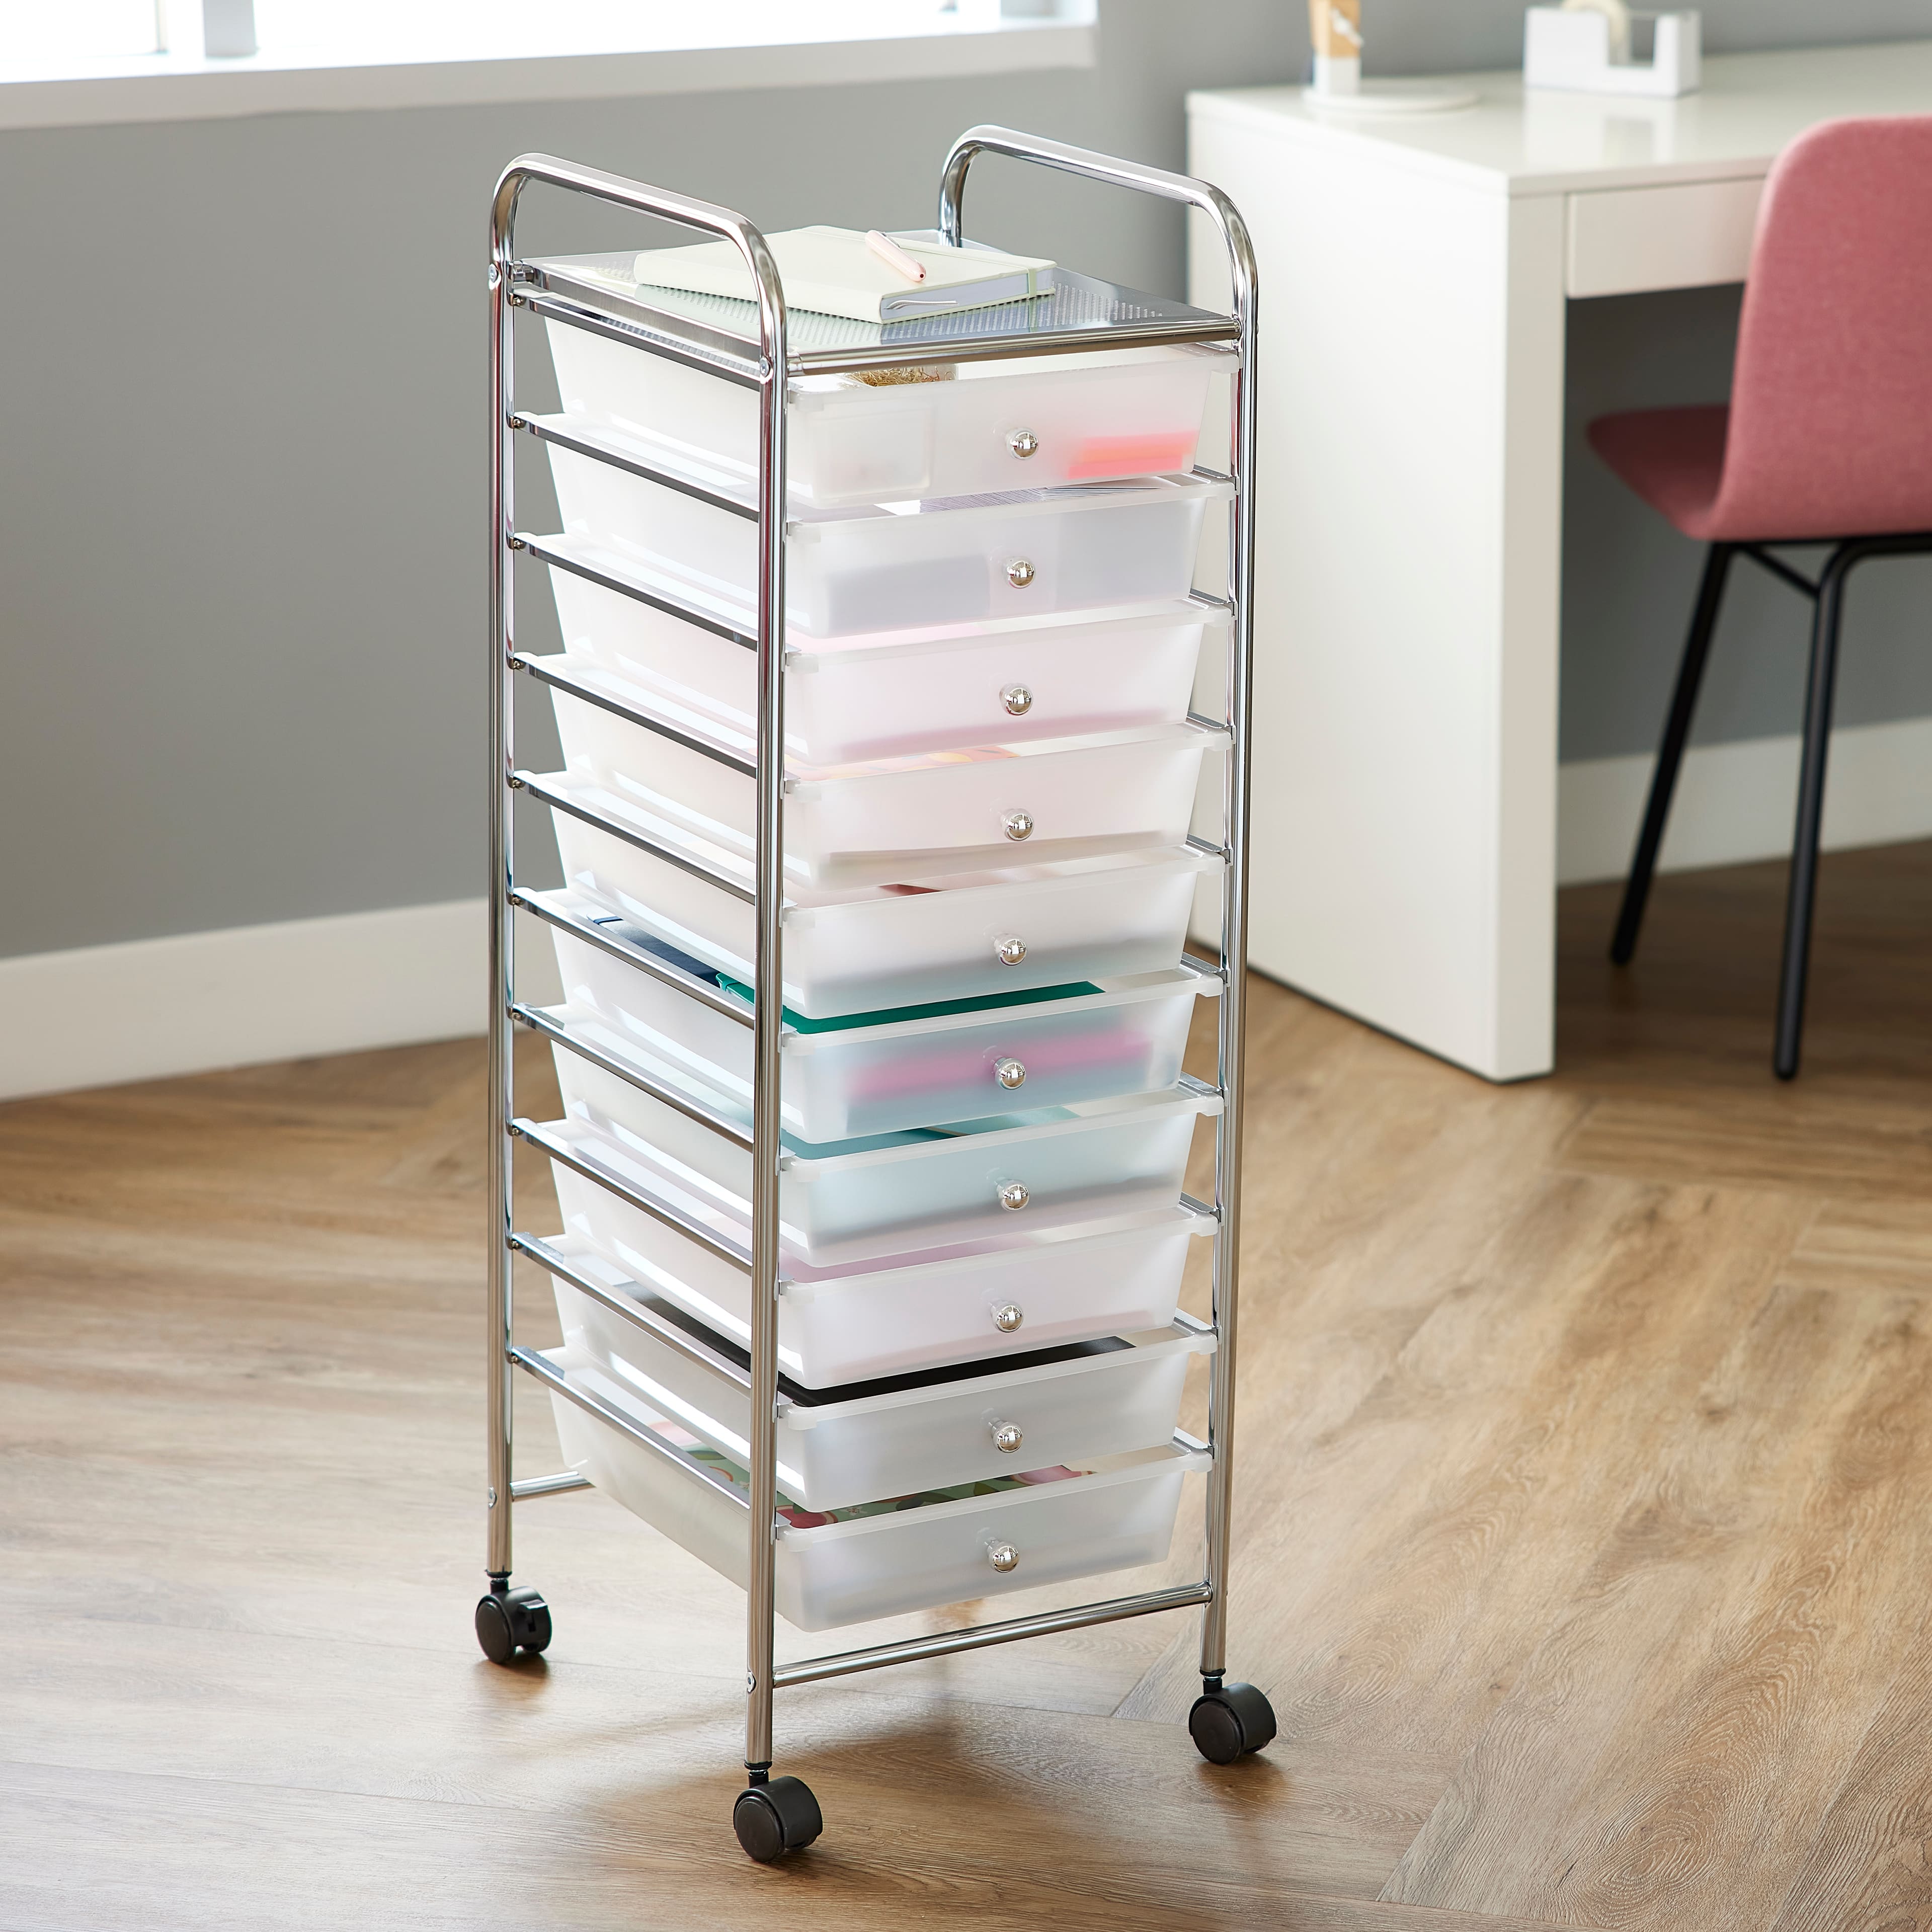  SILKYDRY 10 Drawer Rolling Storage Cart, Organization Cart with  Drawers for Craft Makeup Paper Tool Art Supply, Versatile Utility Cart on  Wheels for Home Office Classroom School (Black) : Office Products